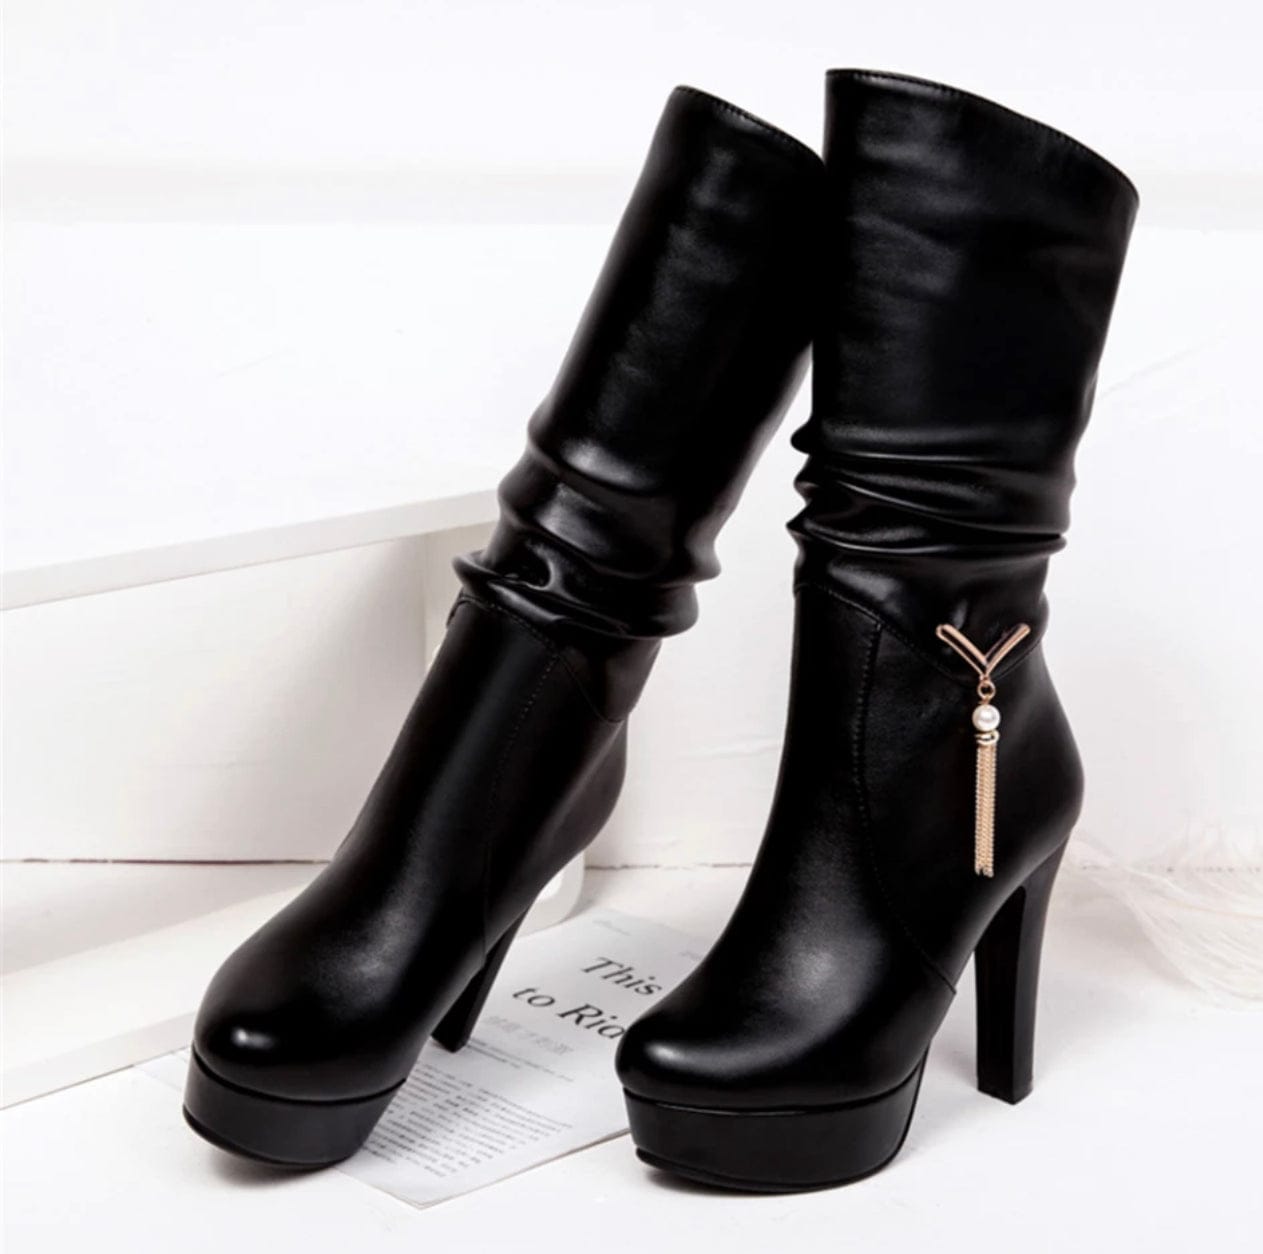 '0010' Pleated Mid-Calf Boots Black 4 Shoes by Bling Addict | BlingxAddict